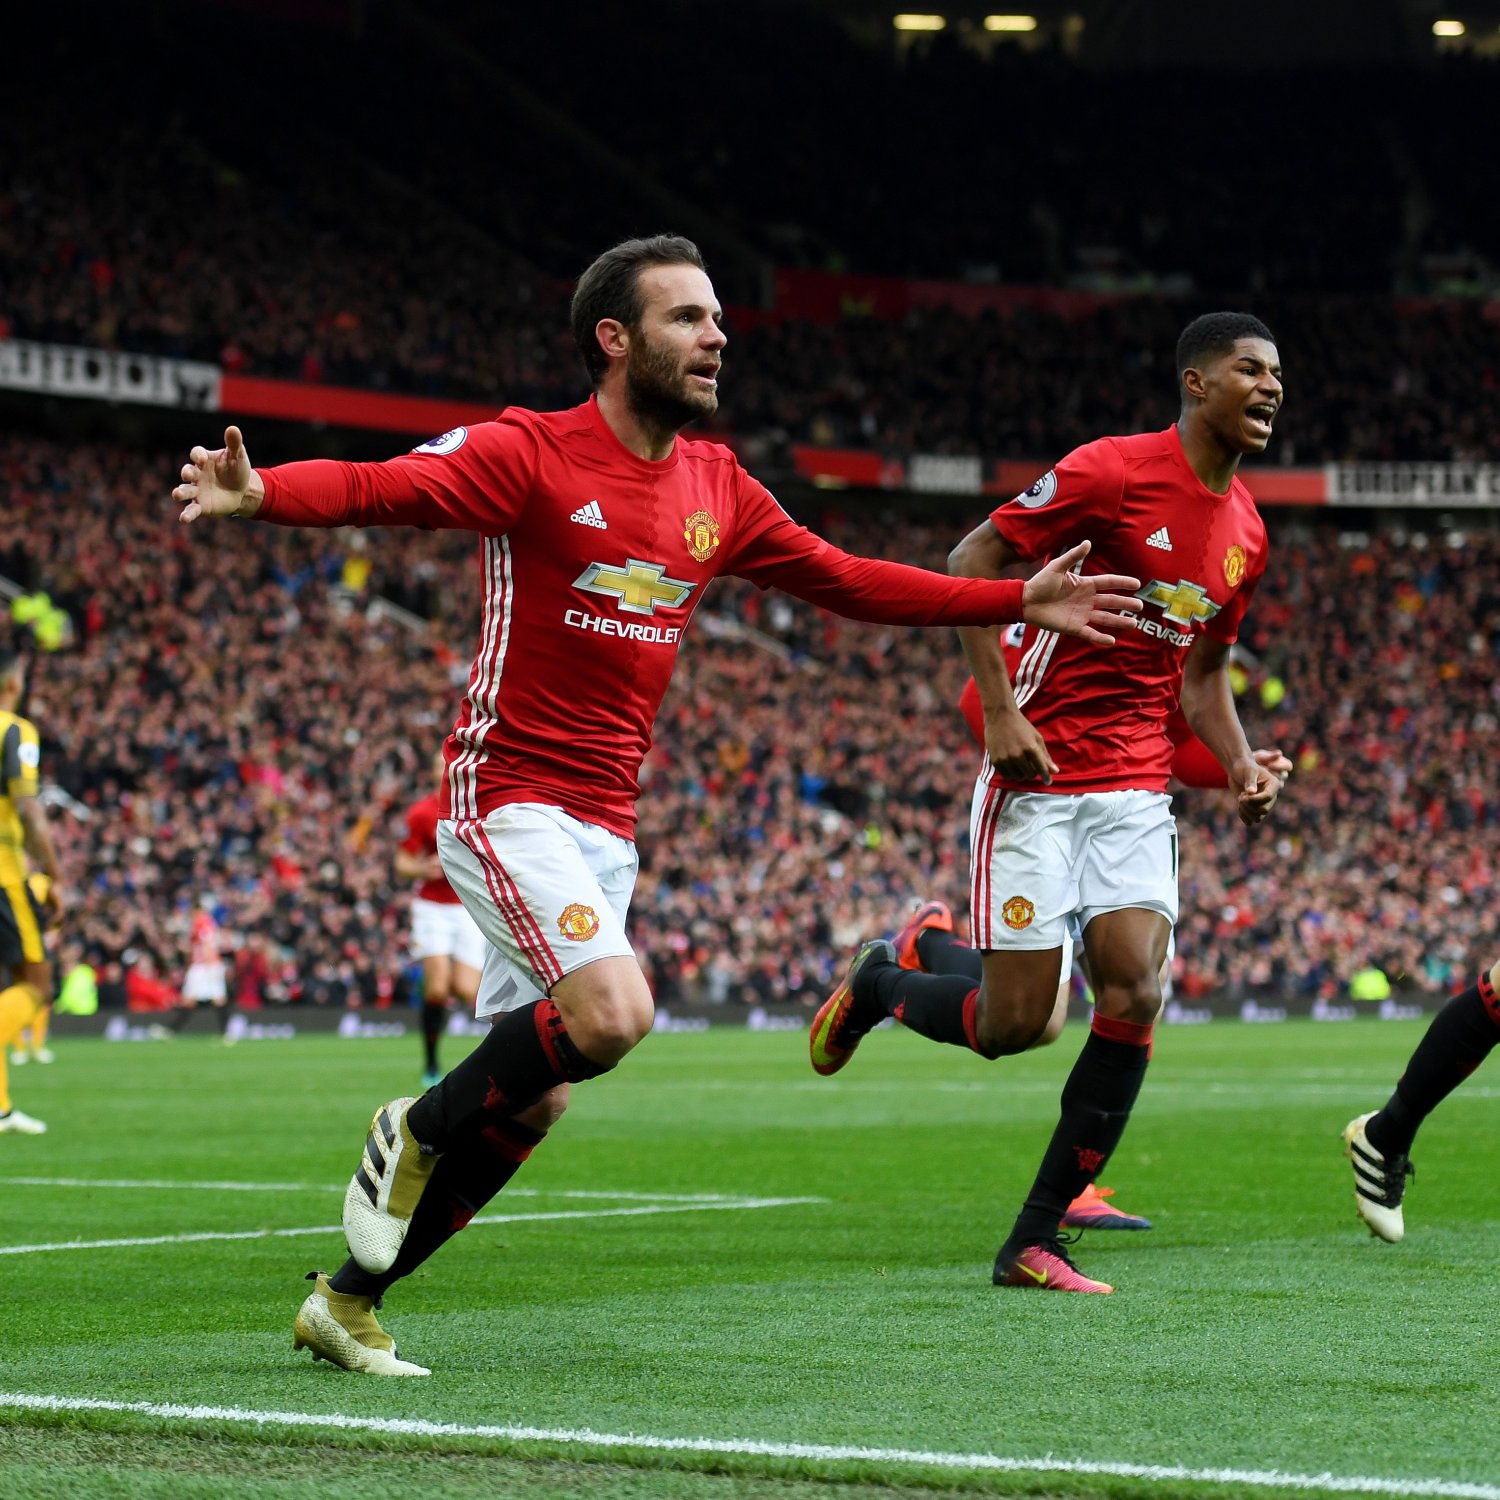 Manchester United vs. Arsenal: Score and Reaction from 2016 Premier League Match